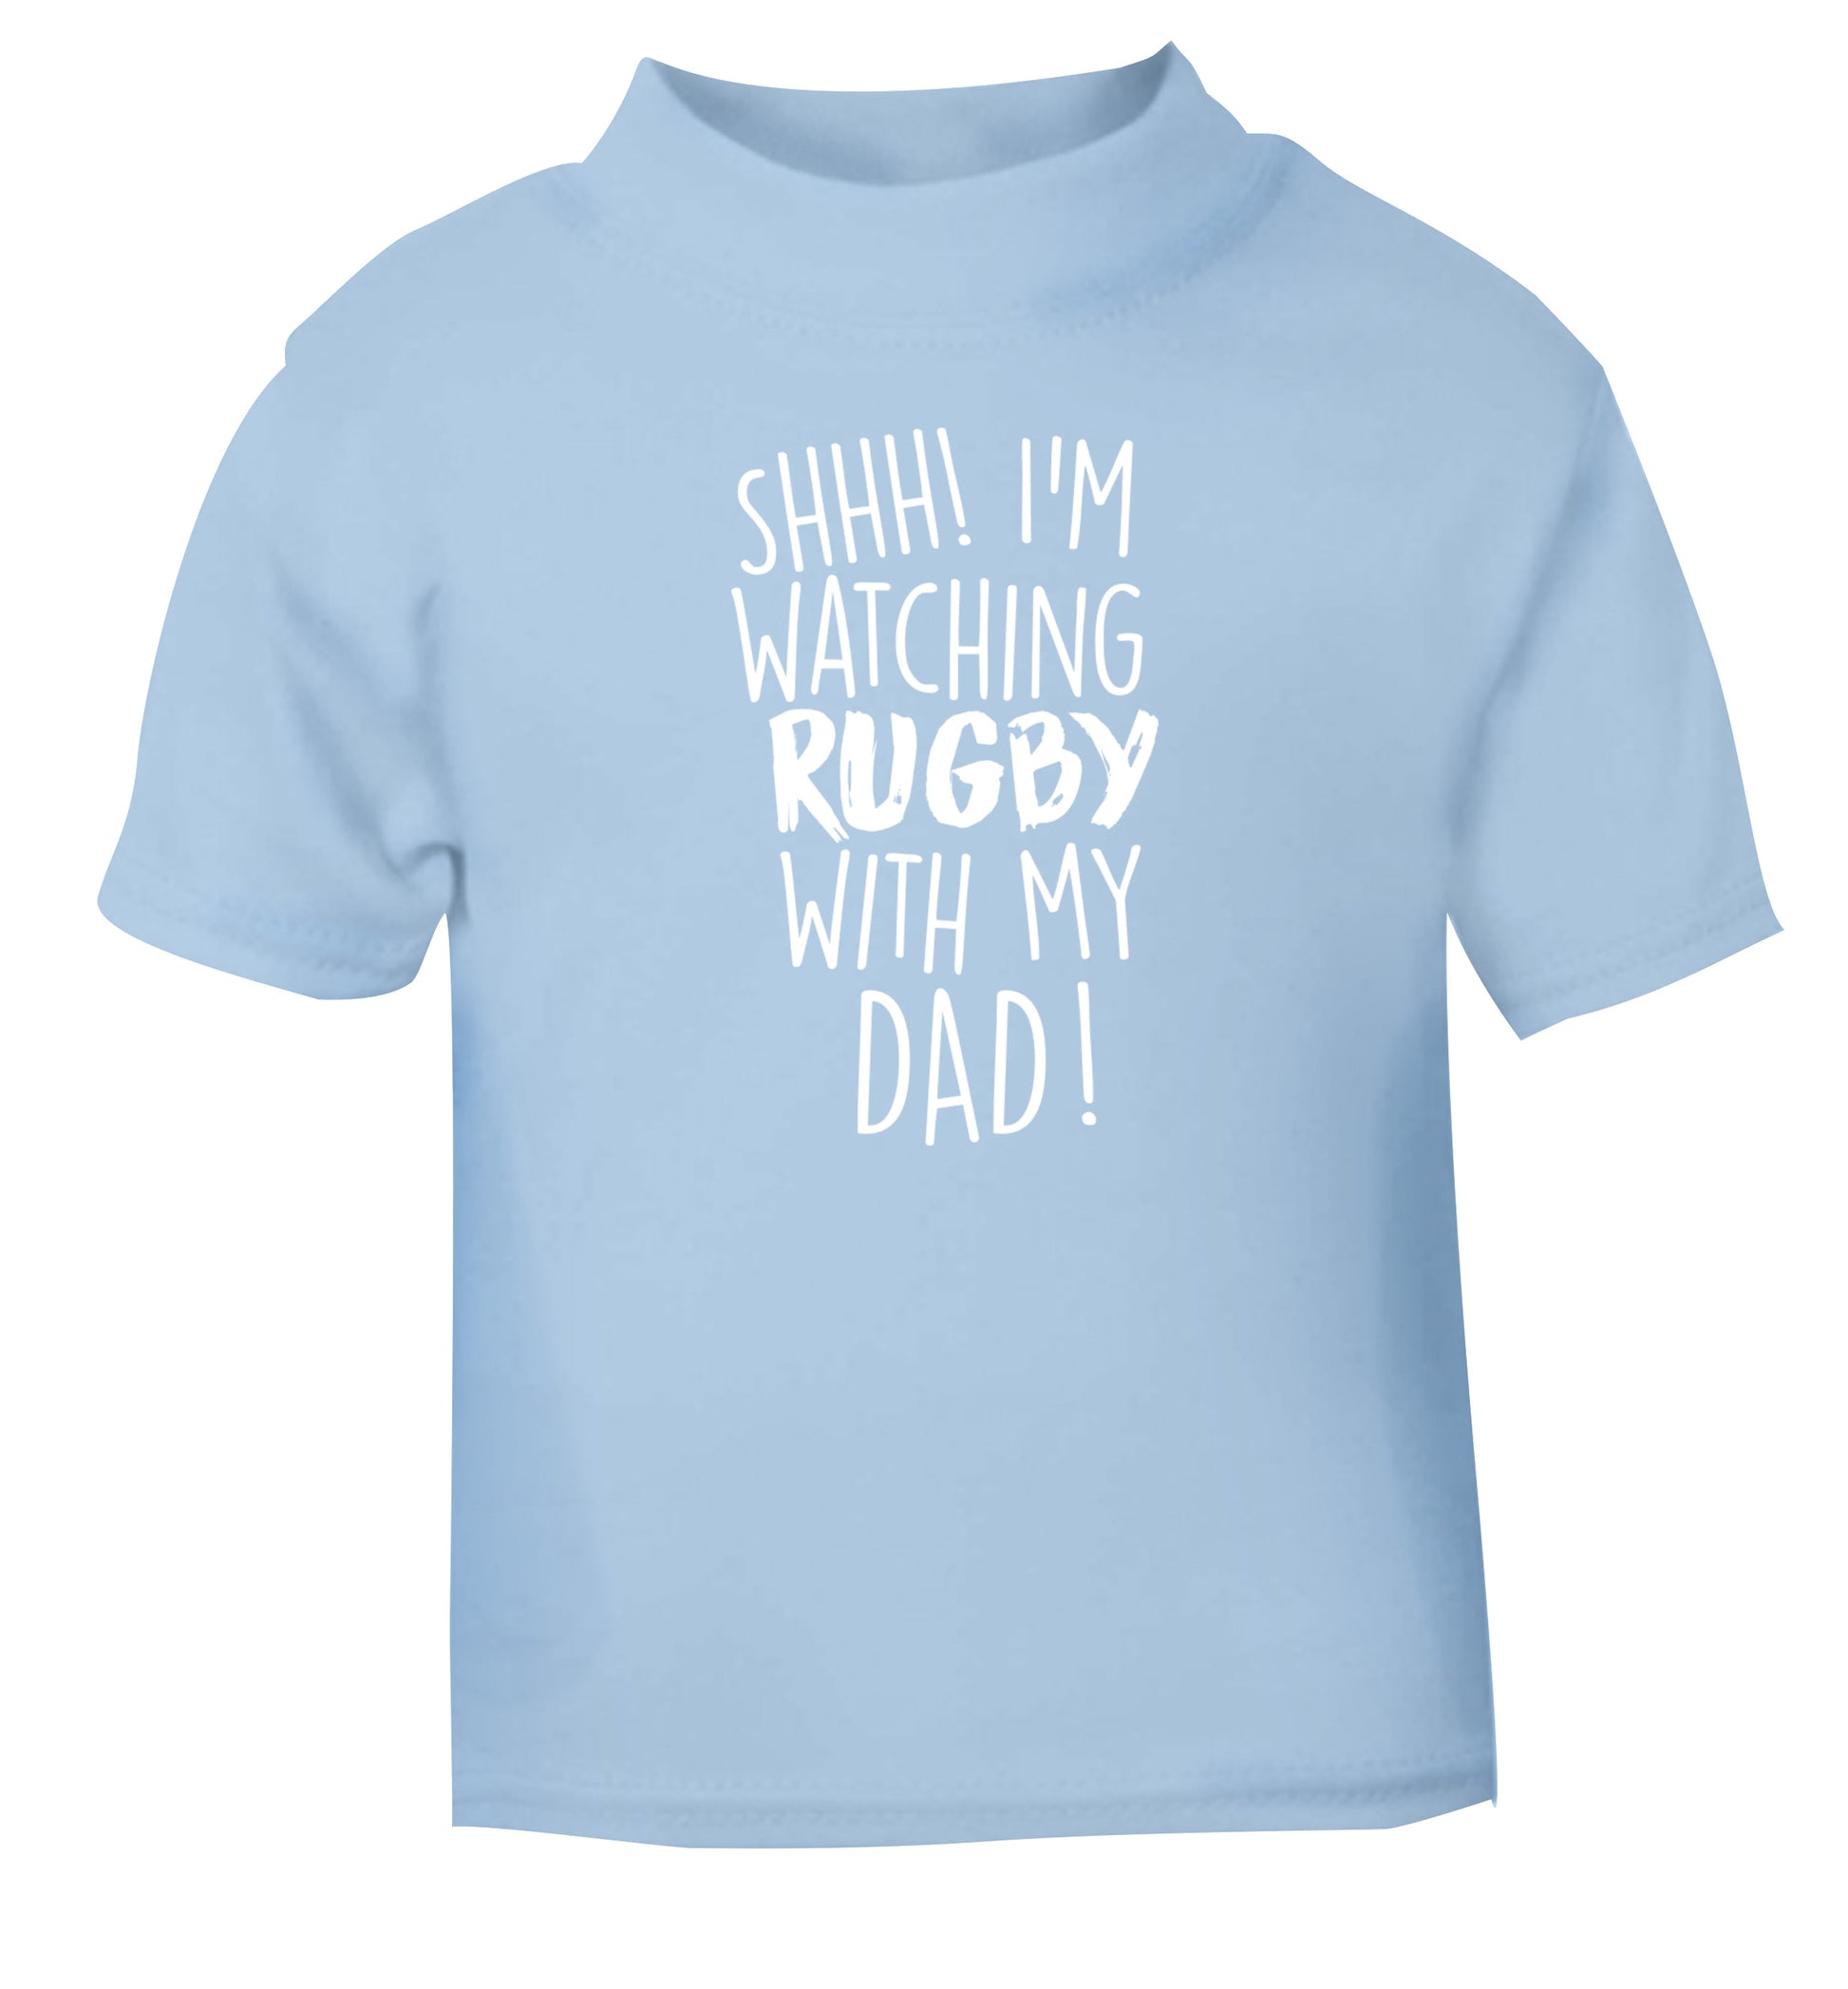 Shh... I'm watching rugby with my dad light blue Baby Toddler Tshirt 2 Years